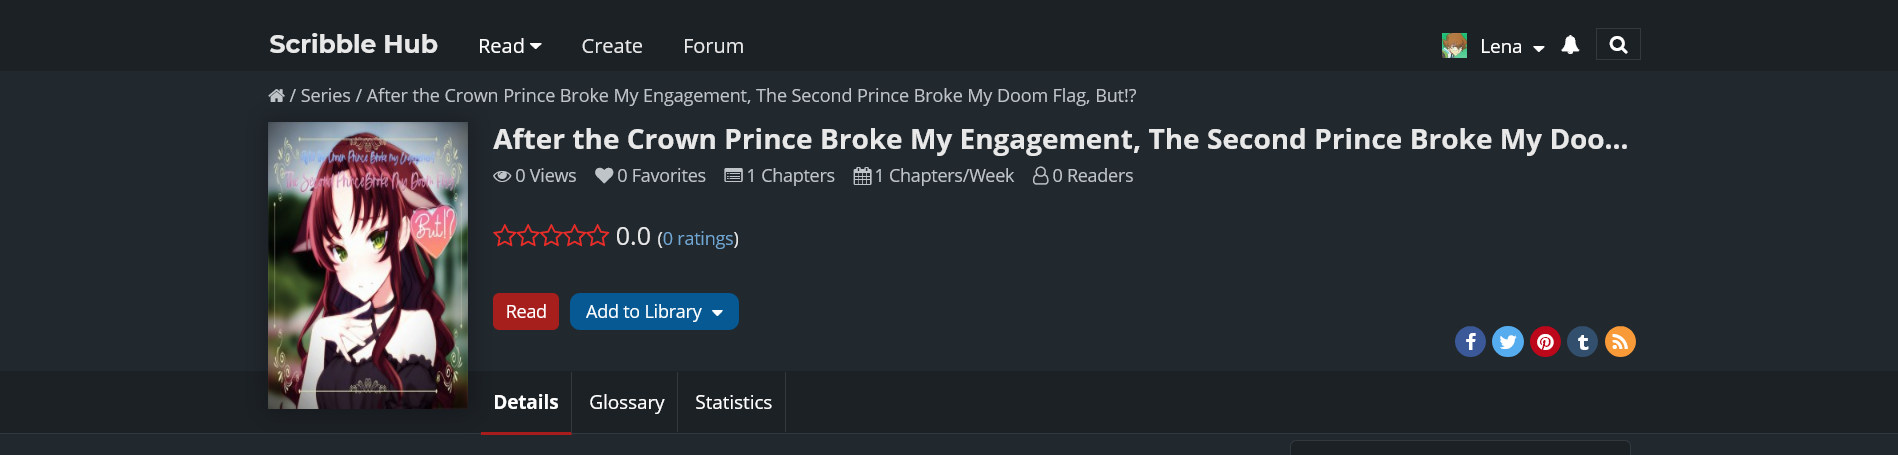 Screenshot 2021-09-19 at 10-49-29 After the Crown Prince Broke My Engagement, The Second Princ...png